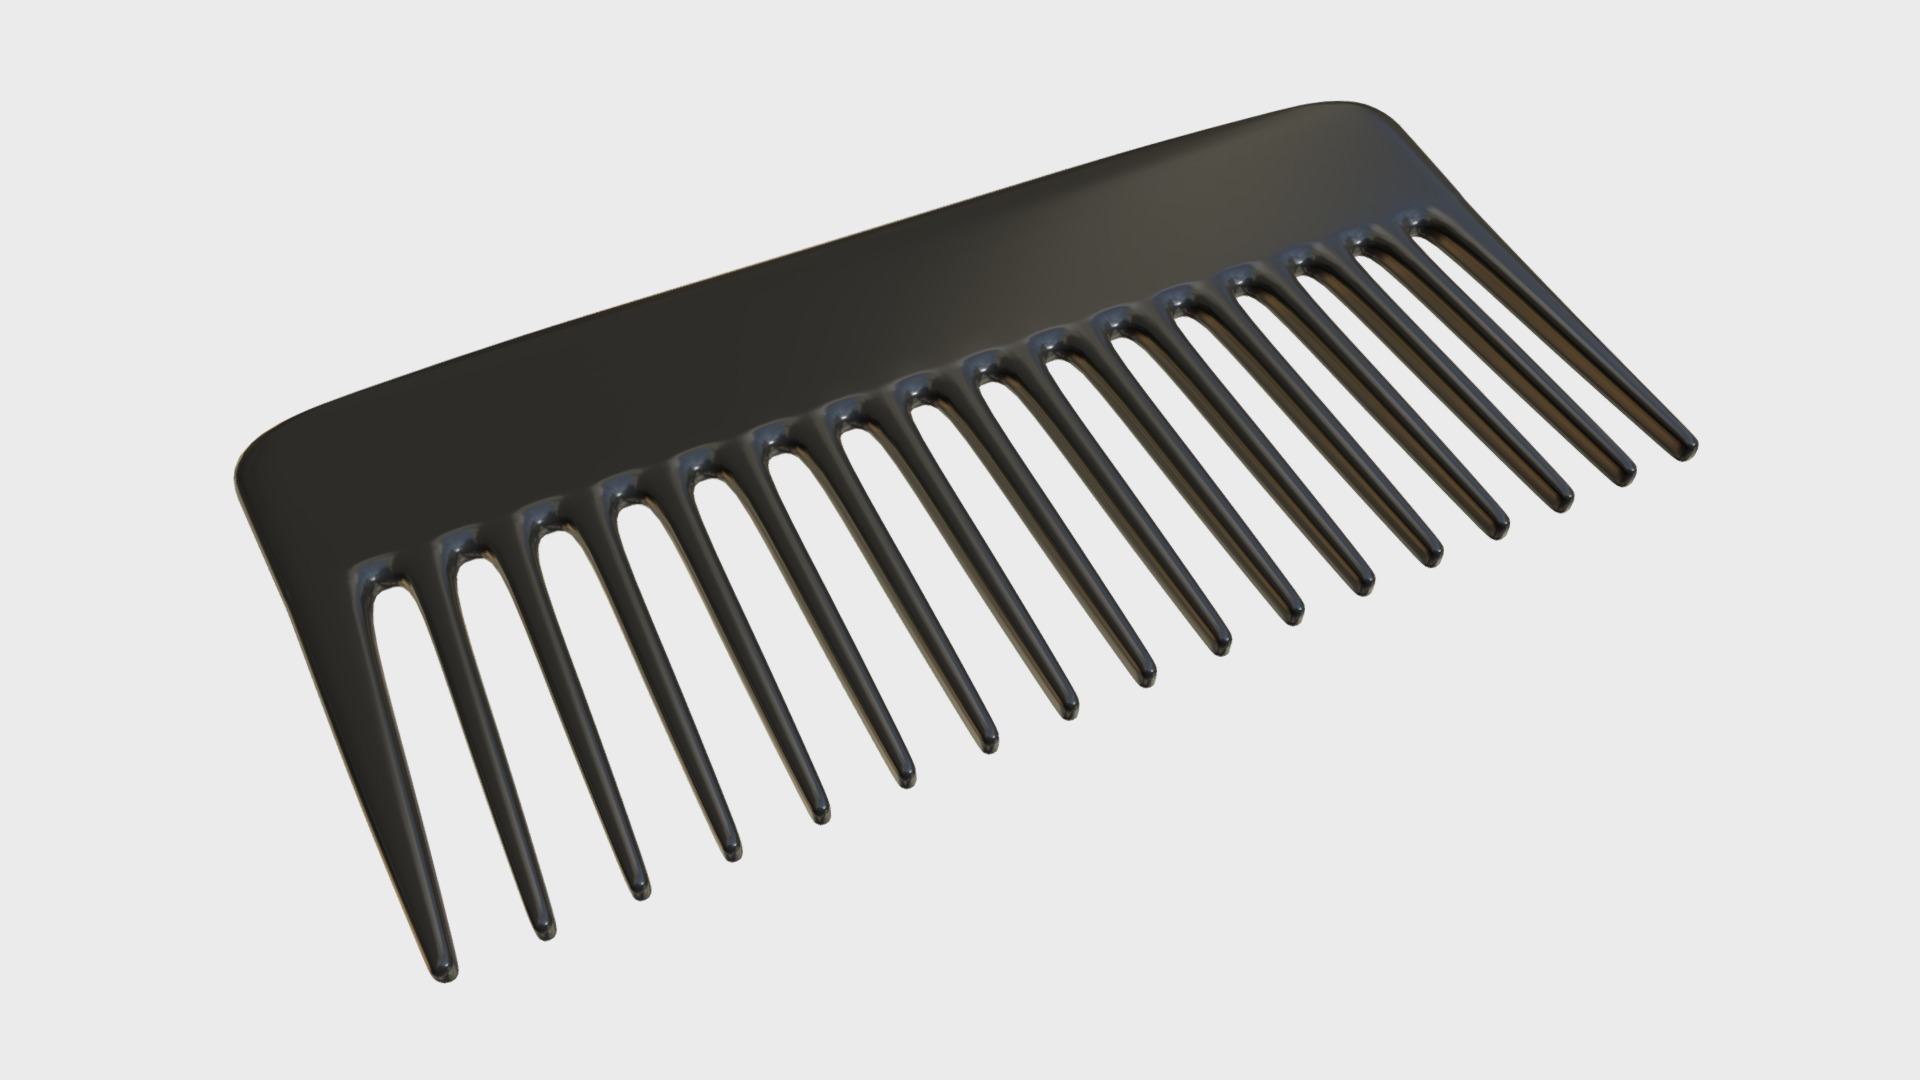 3D model Small wide tooth comb - This is a 3D model of the Small wide tooth comb. The 3D model is about a black and silver keyboard.